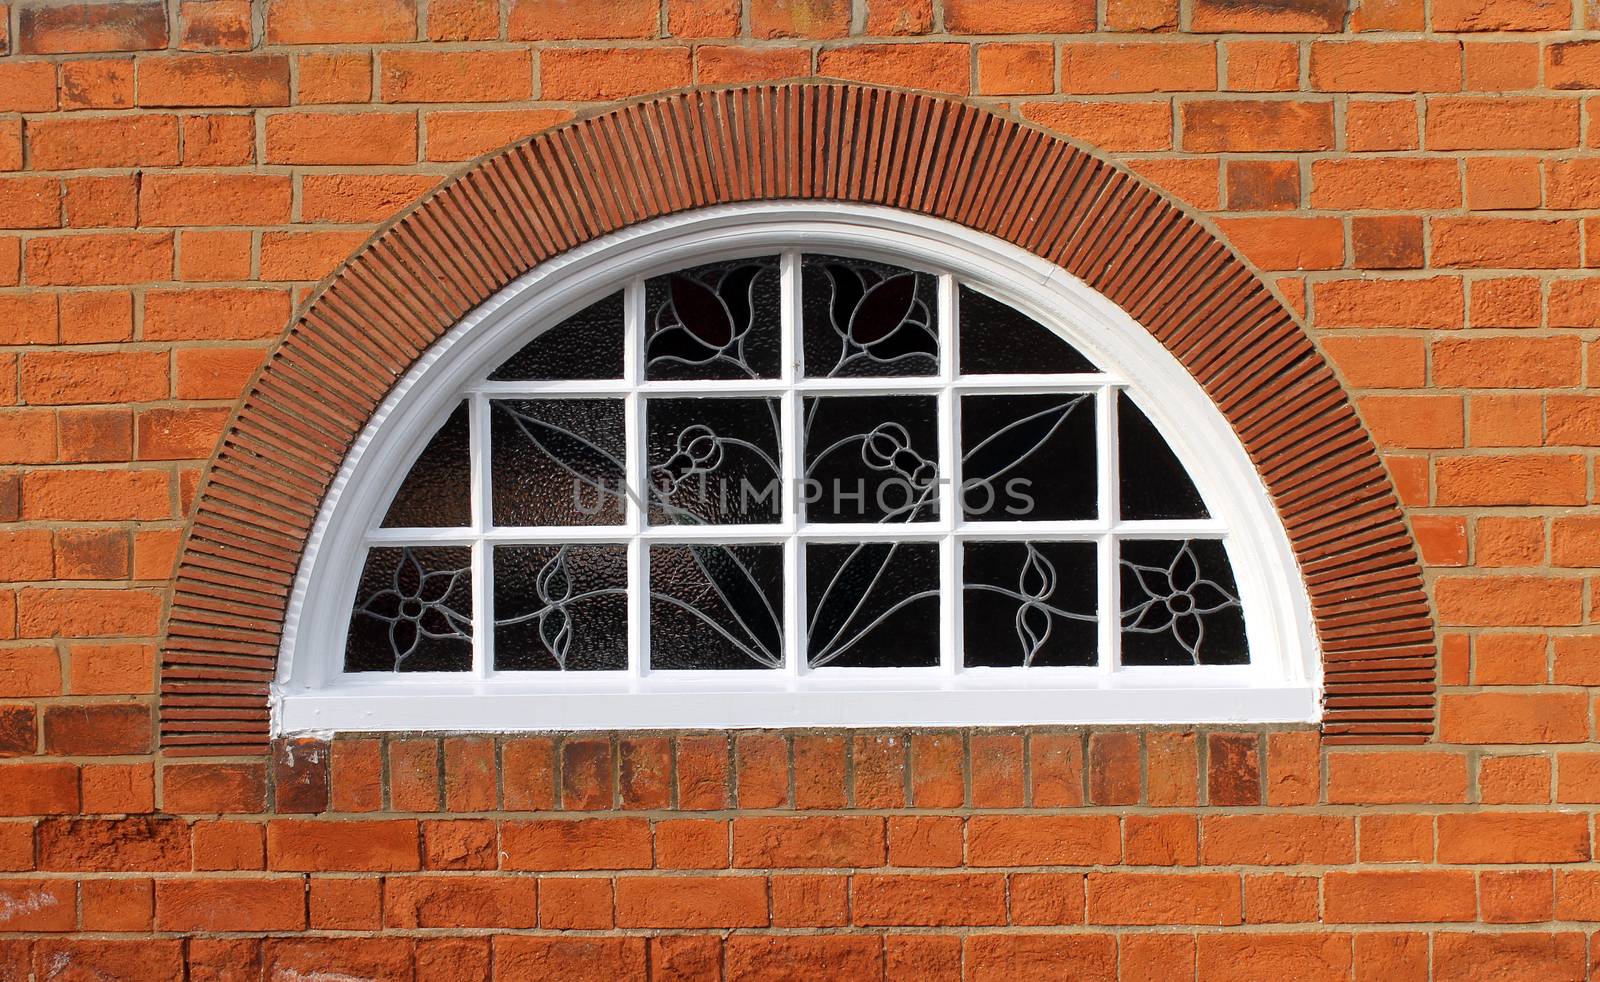 Exterior of a brick building with an arched window.